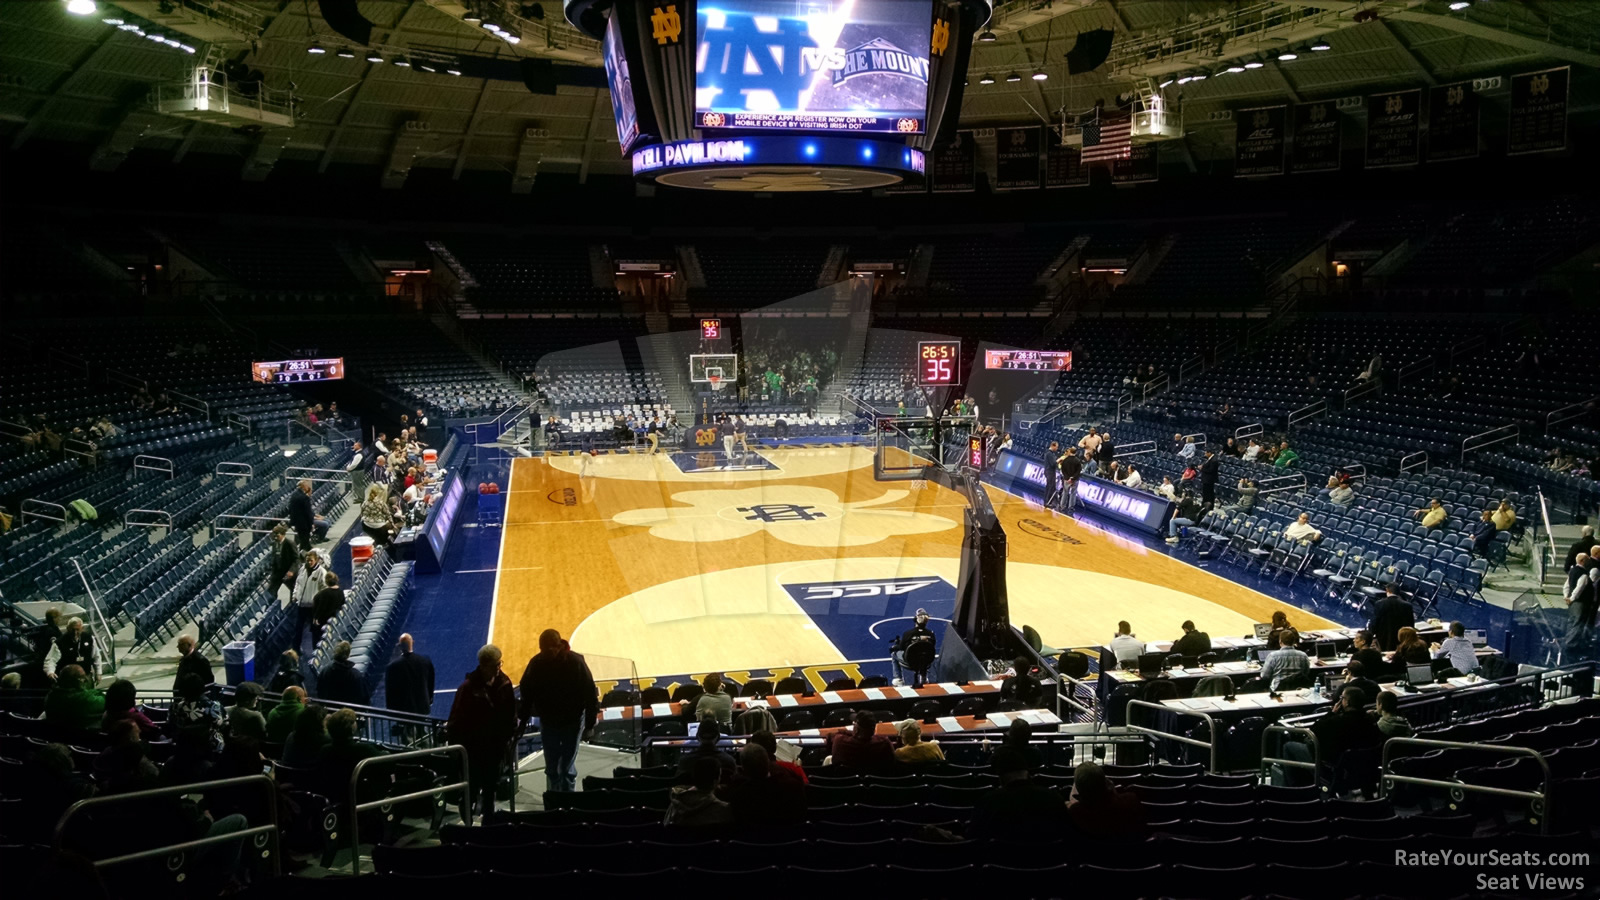 section 15, row 15 seat view  - joyce center